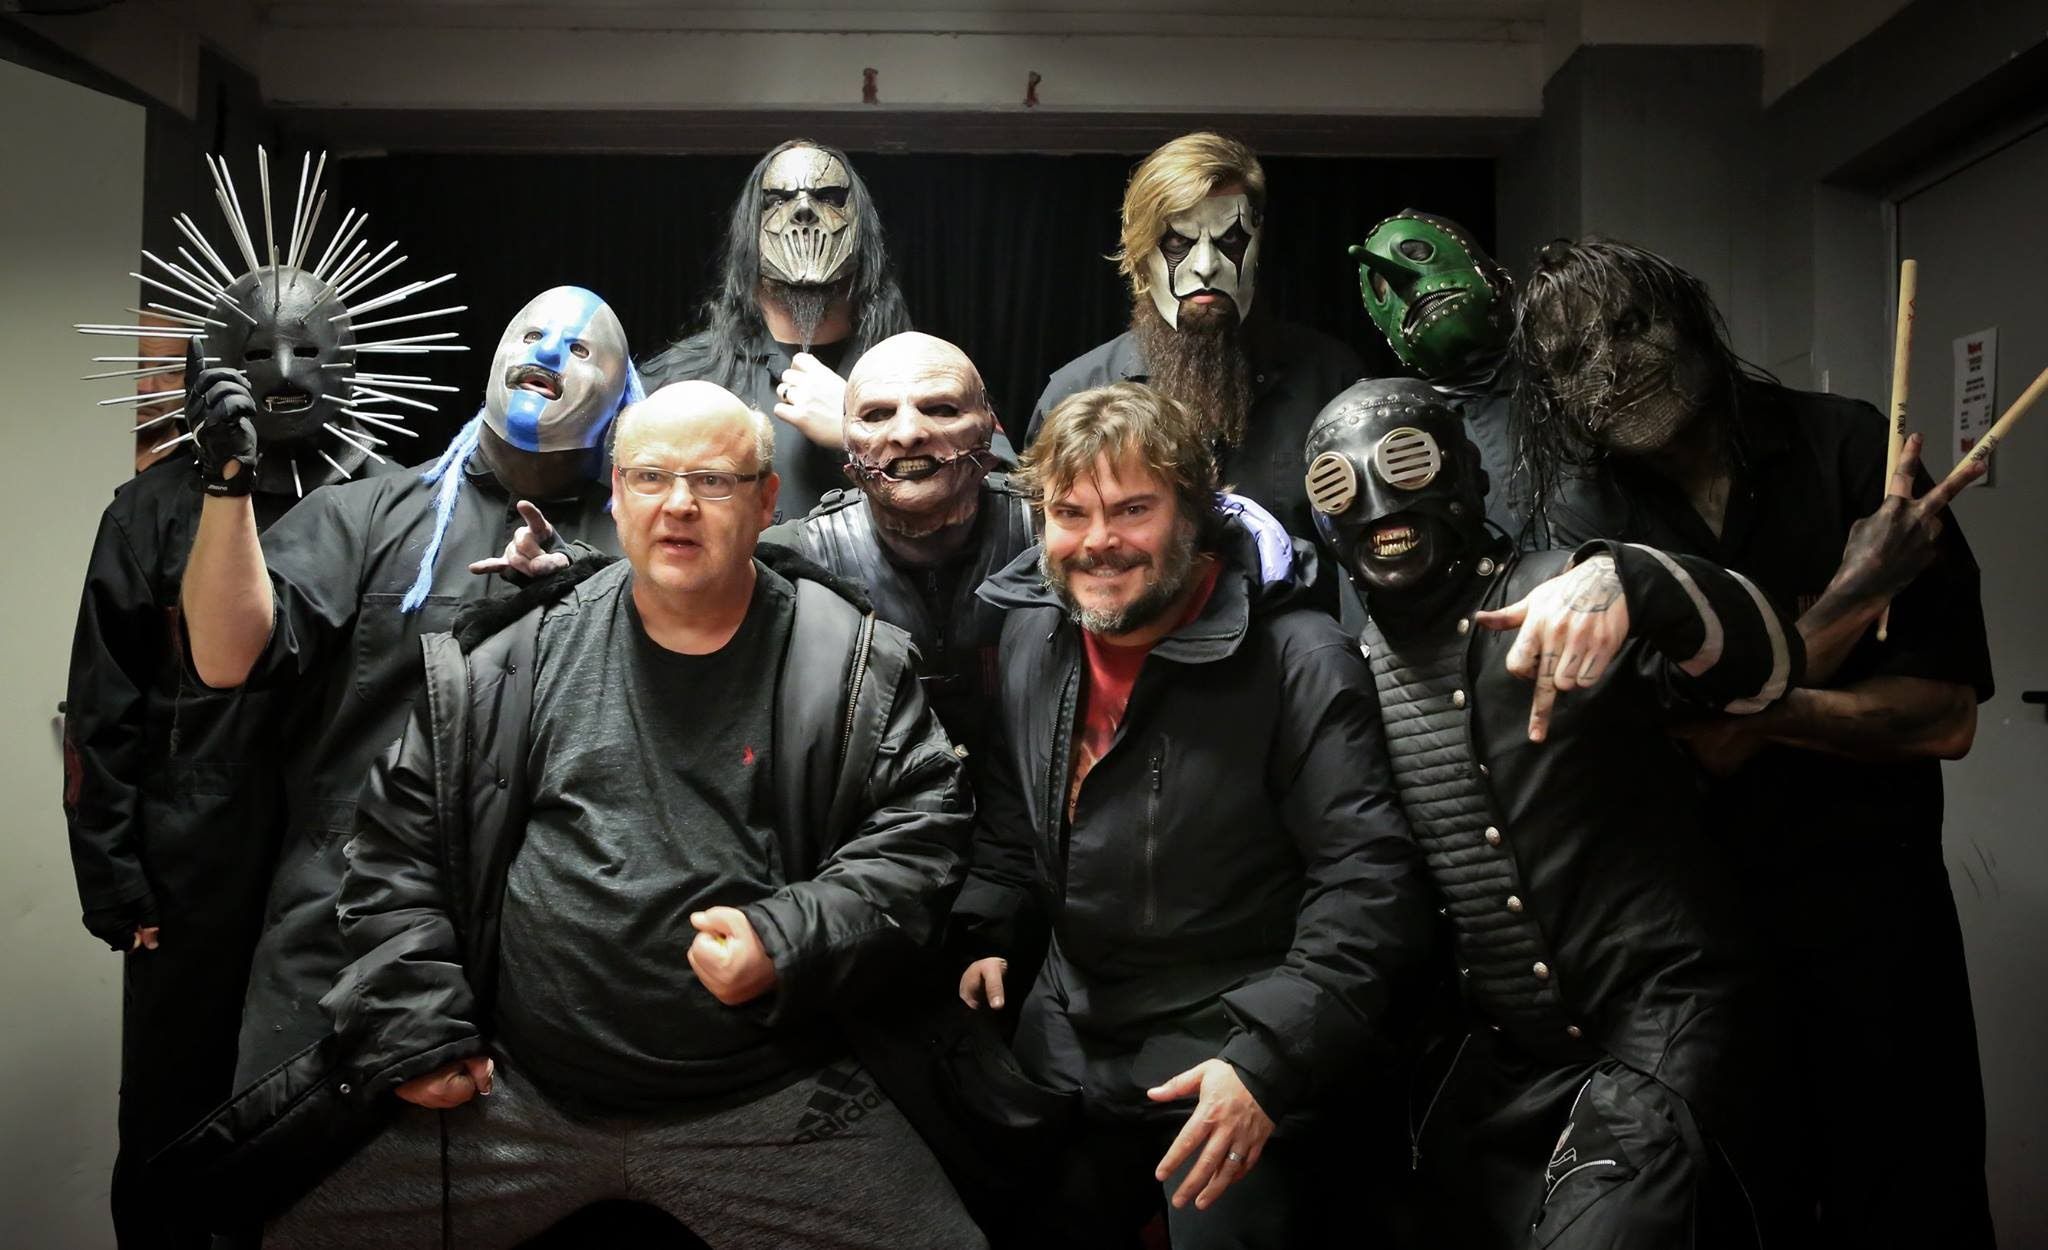 So I just found out that this picture exists: Slipknot and Tenacious D. Also check out the dude on the far left behind the door